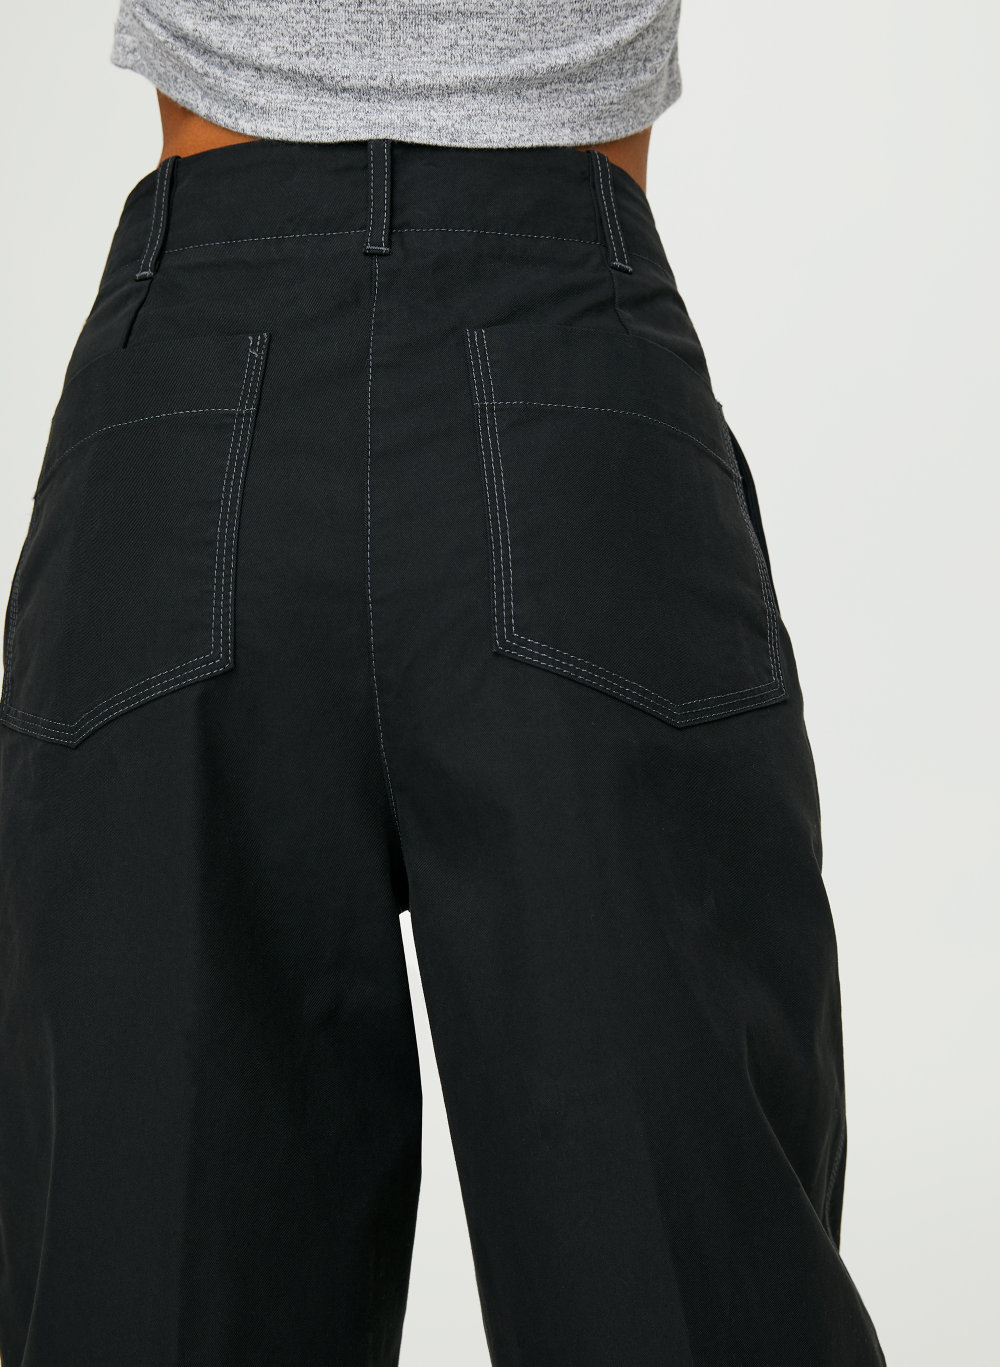 Wilfred Free DAY-OFF PANT | Aritzia INTL